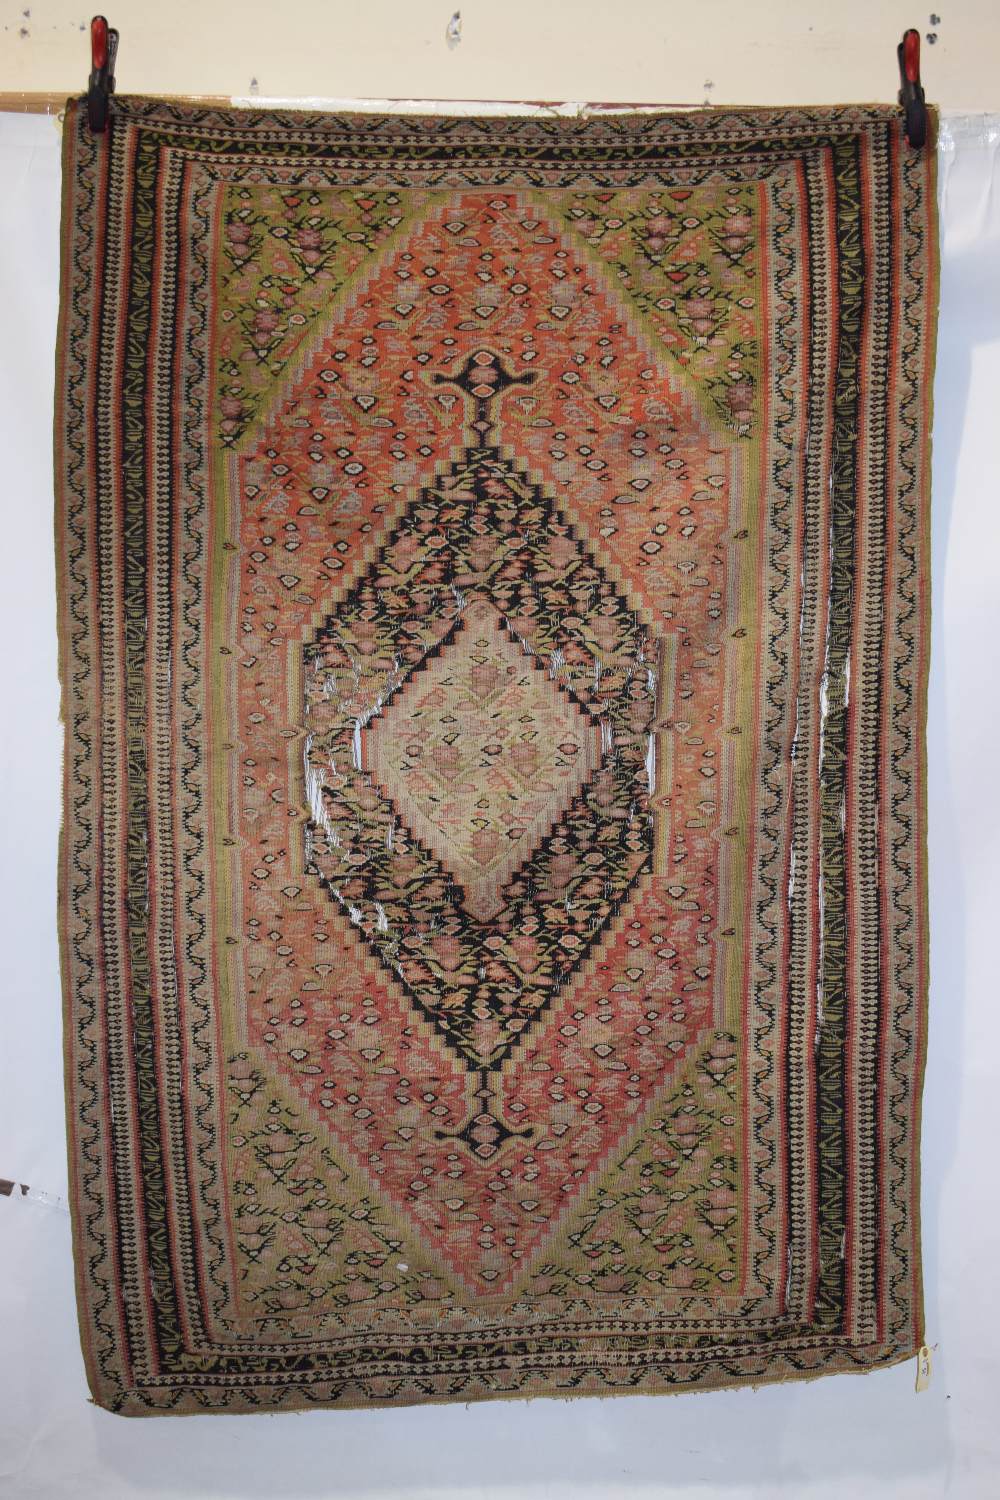 Senneh ghileem, north west Persia, circa 1920s-30s, 6ft. 6in. X 4ft. 5in. 1.98m. X 1.35m. Overall